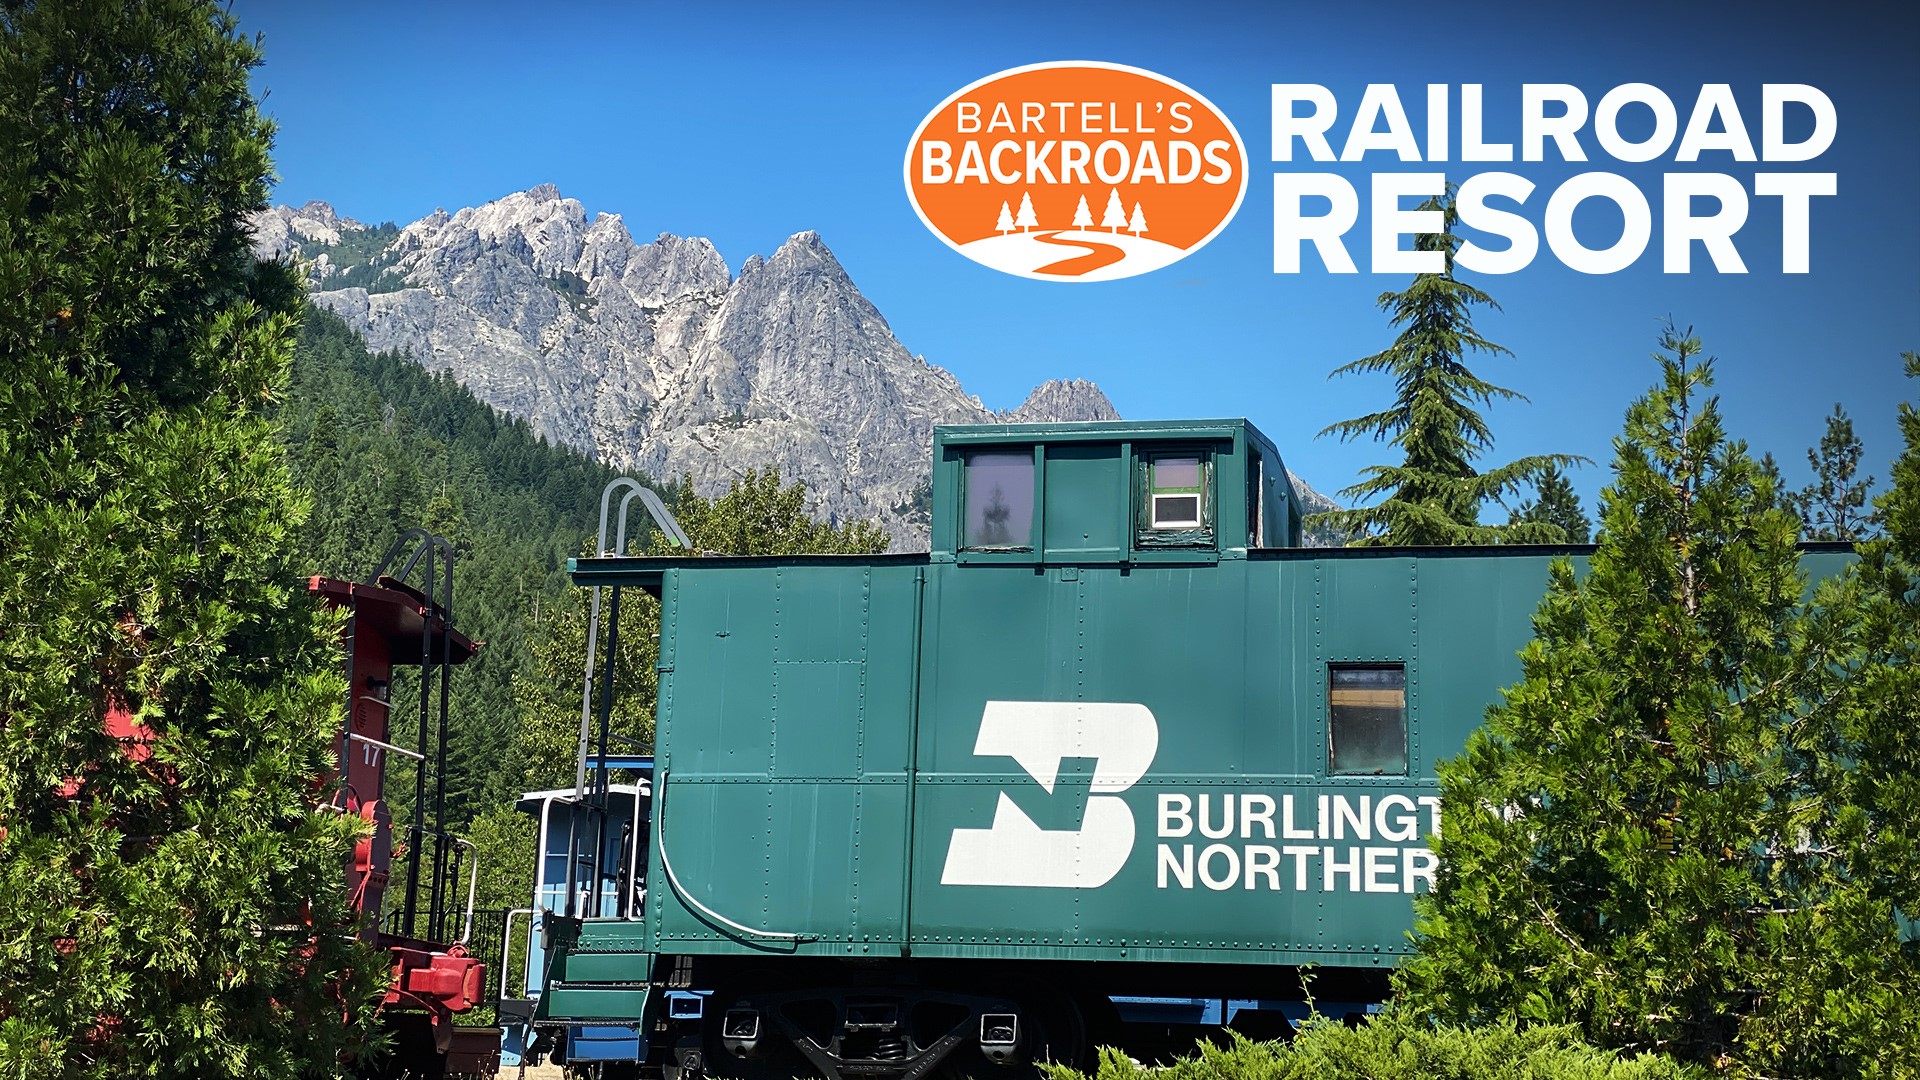 John Bartell heads to the little railroad town of Dunsmuir, where train lovers can take their obsession to a whole new level, and maybe catch a relaxing nap.